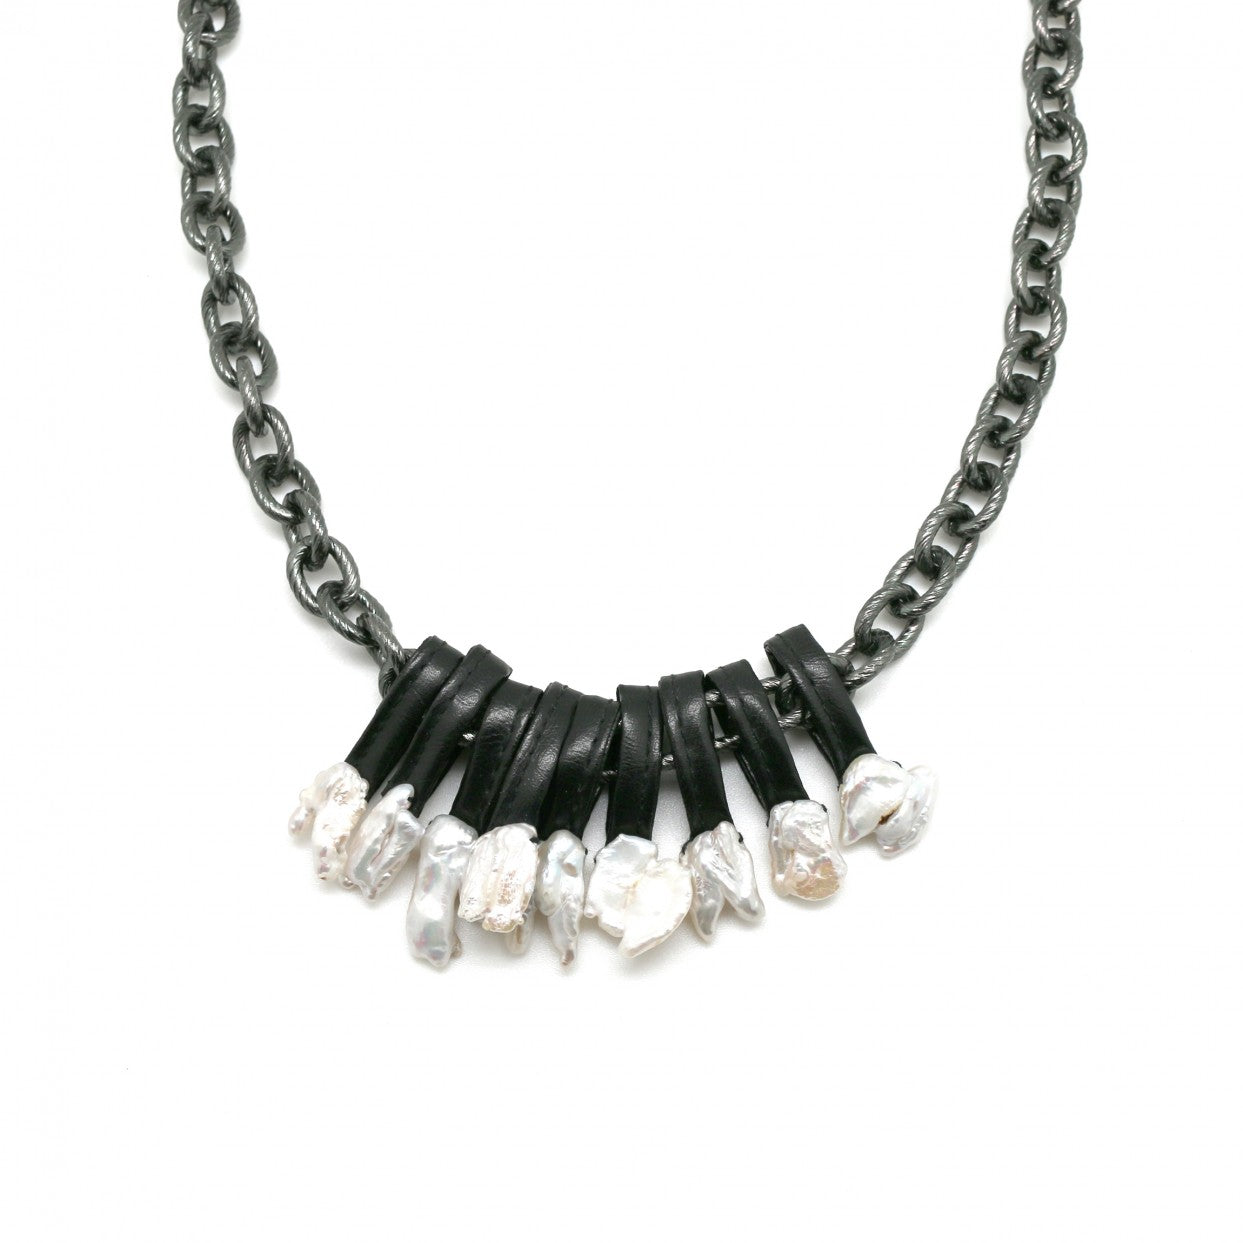 Moon C Fashion Pearl Long Chain Necklace / Stainless Steel, Baroque Pearls / Black, White/ Unique Jewelry